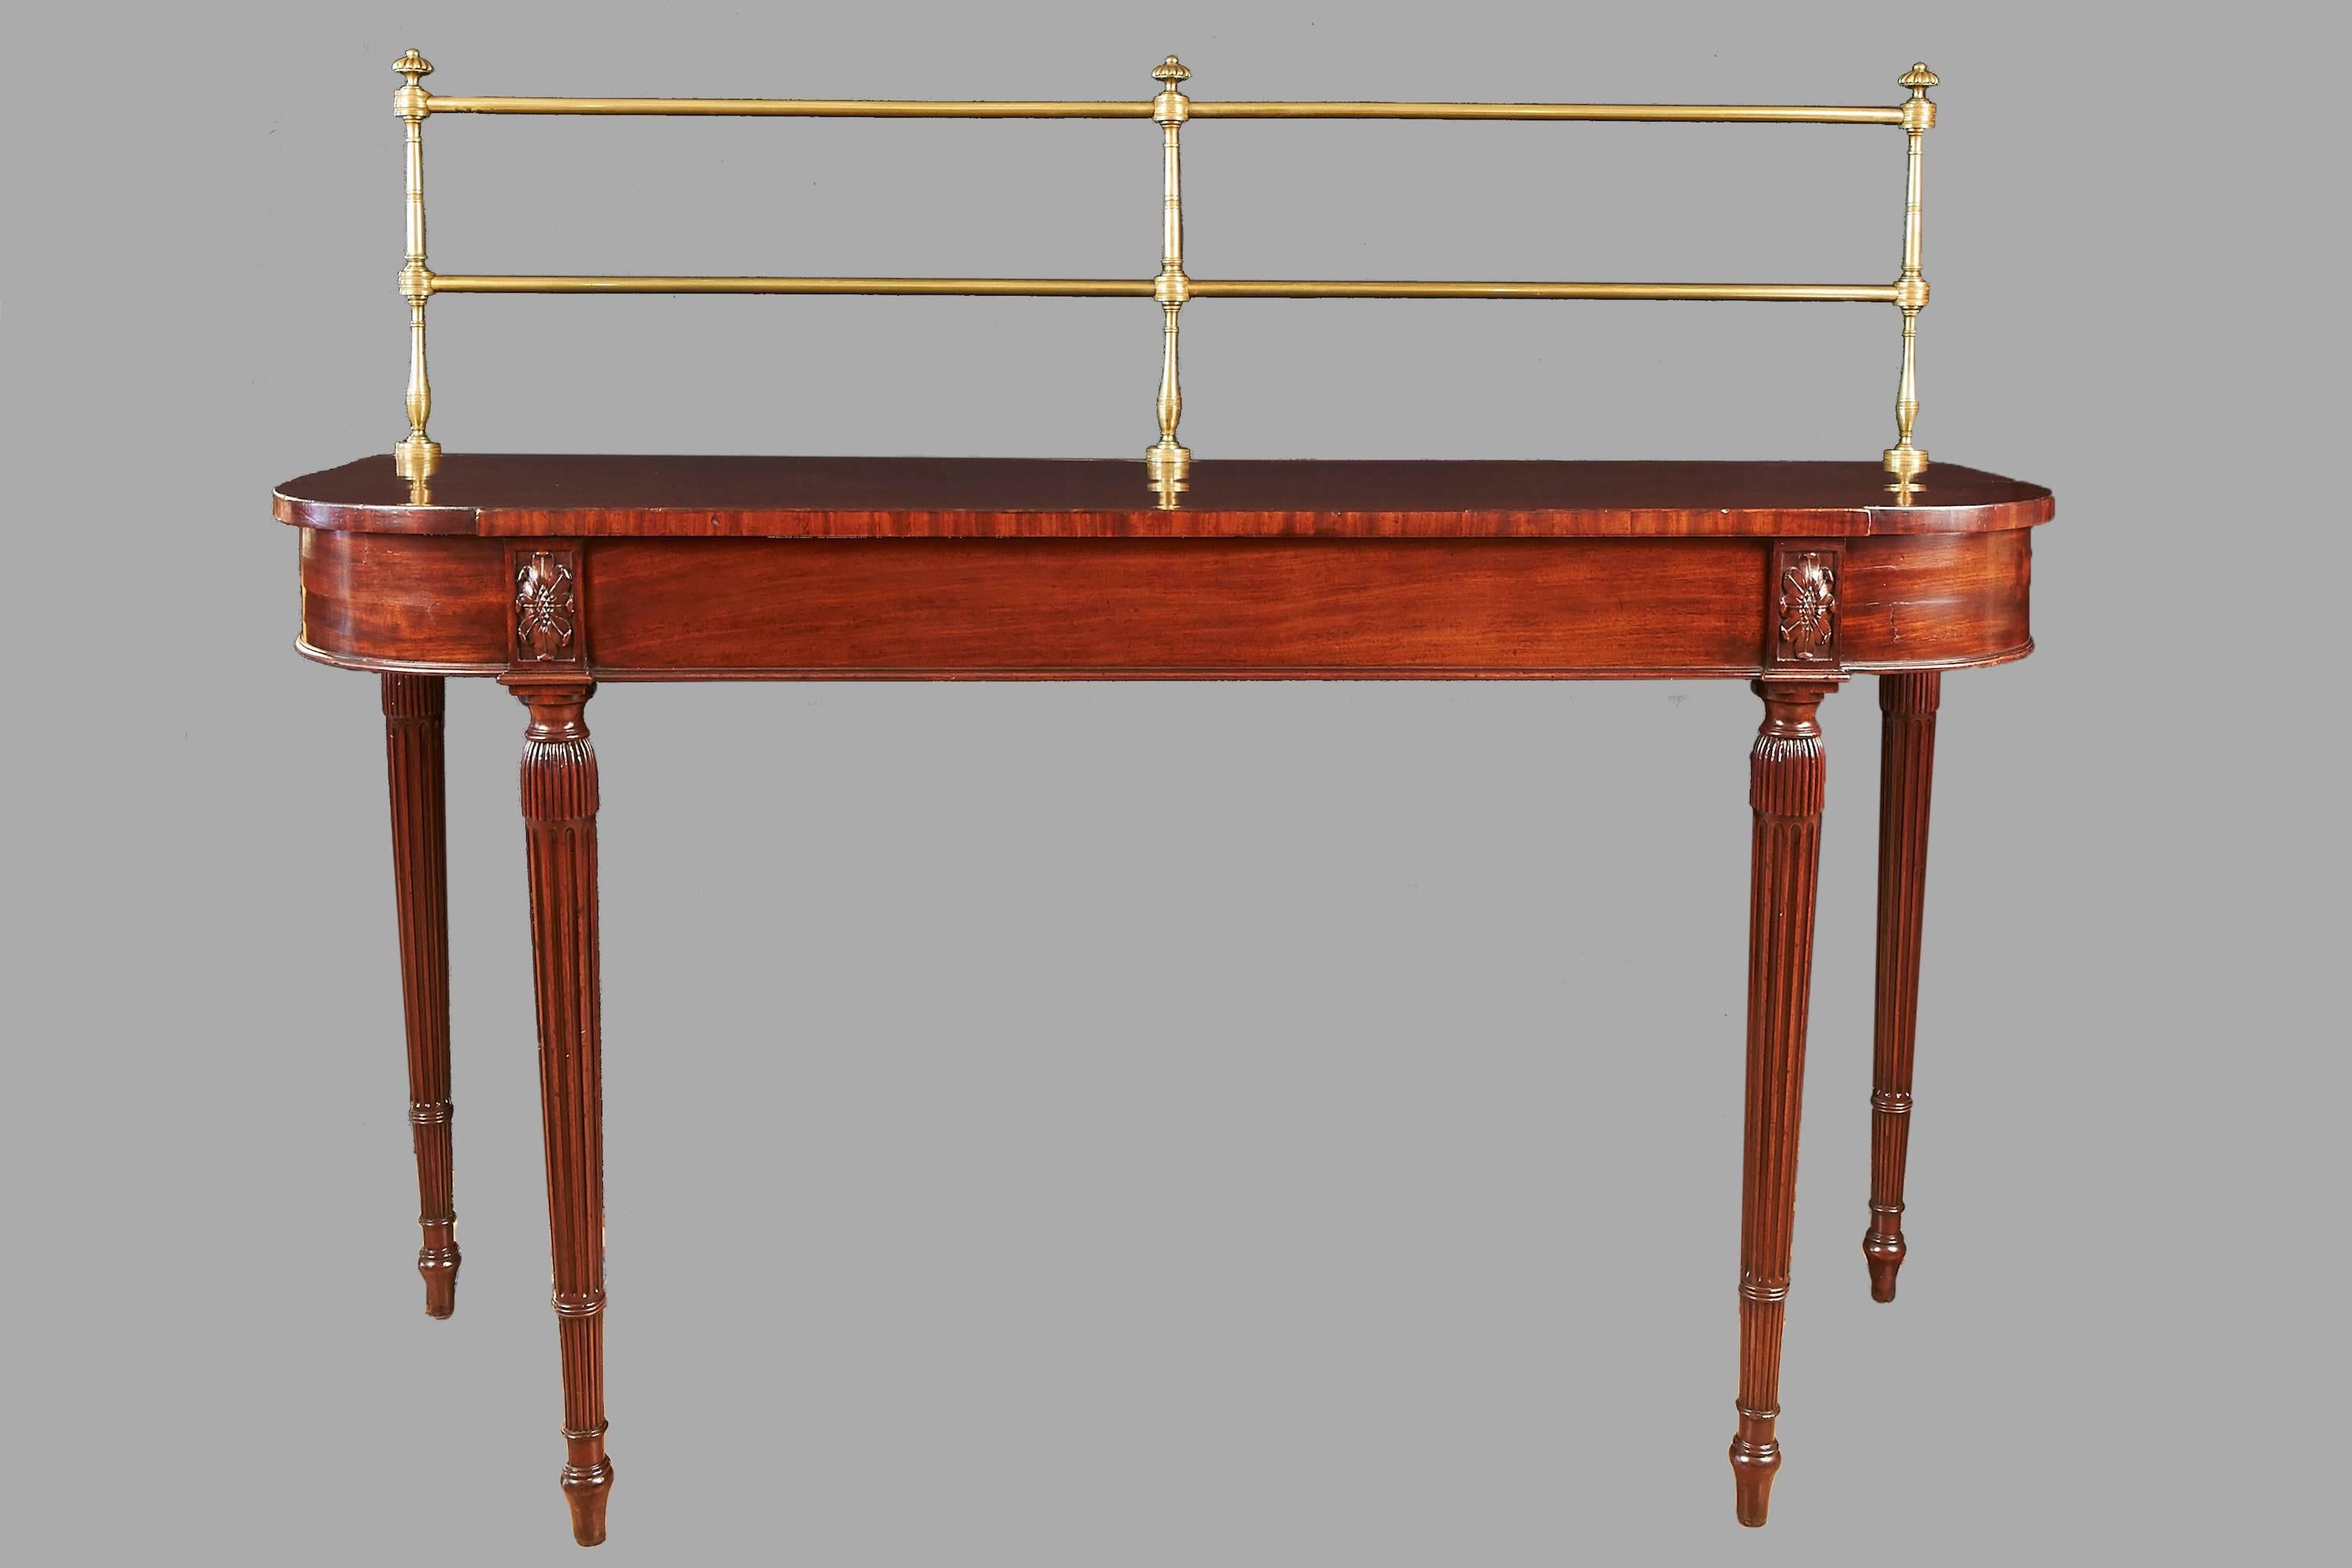 Sheraton Small Scale George III Period Mahogany Server with Brass Gallery